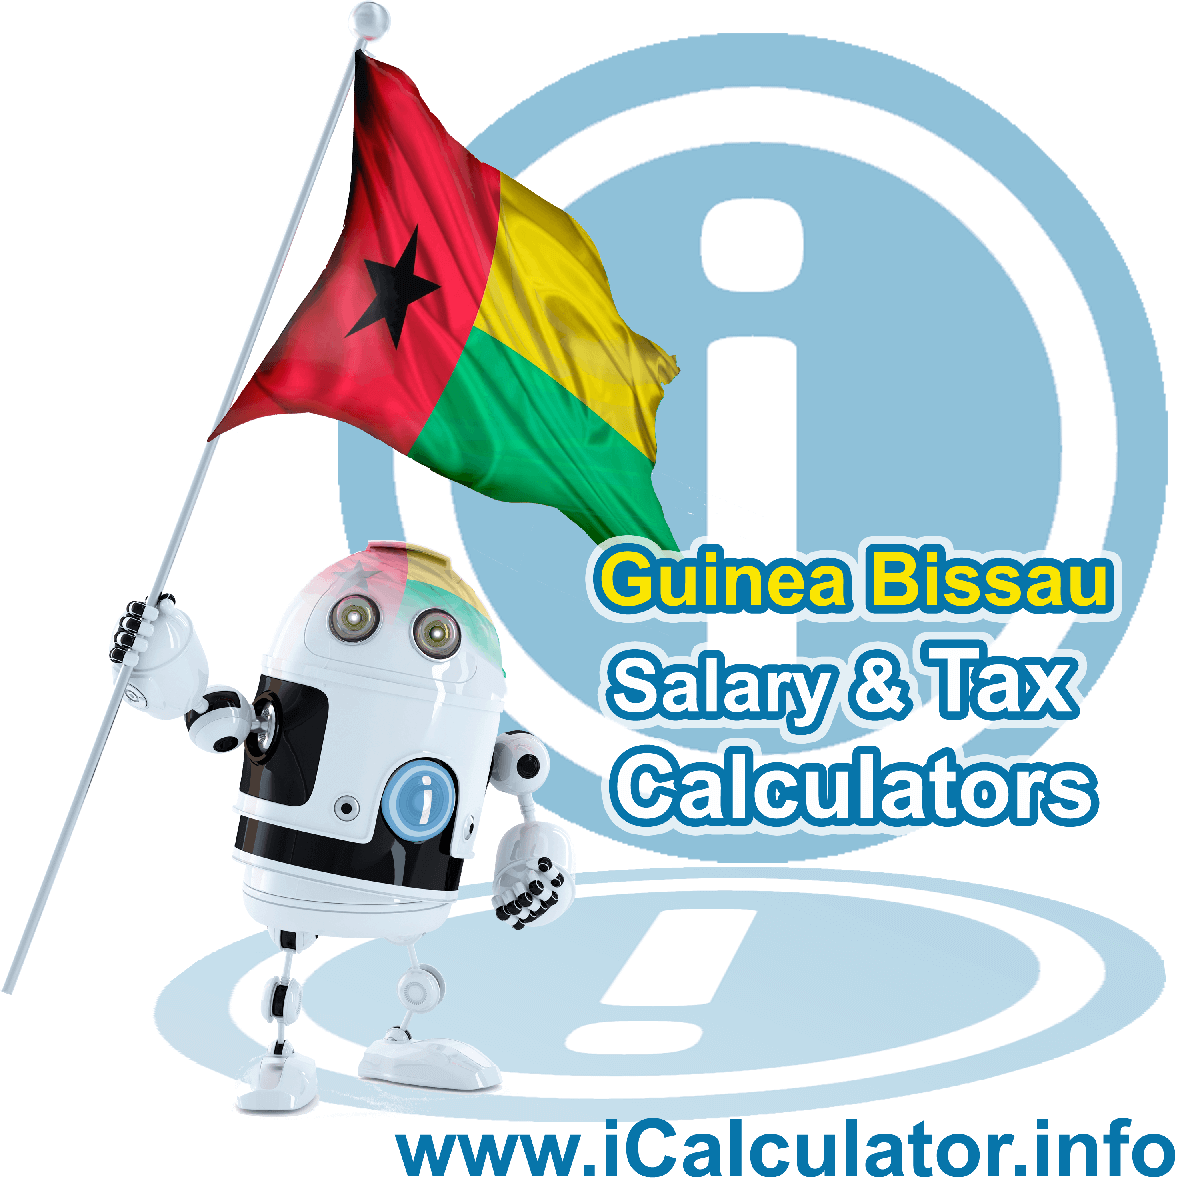 Guinea Bissau Tax Calculator. This image shows the Guinea Bissau flag and information relating to the tax formula for the Guinea Bissau Salary Calculator